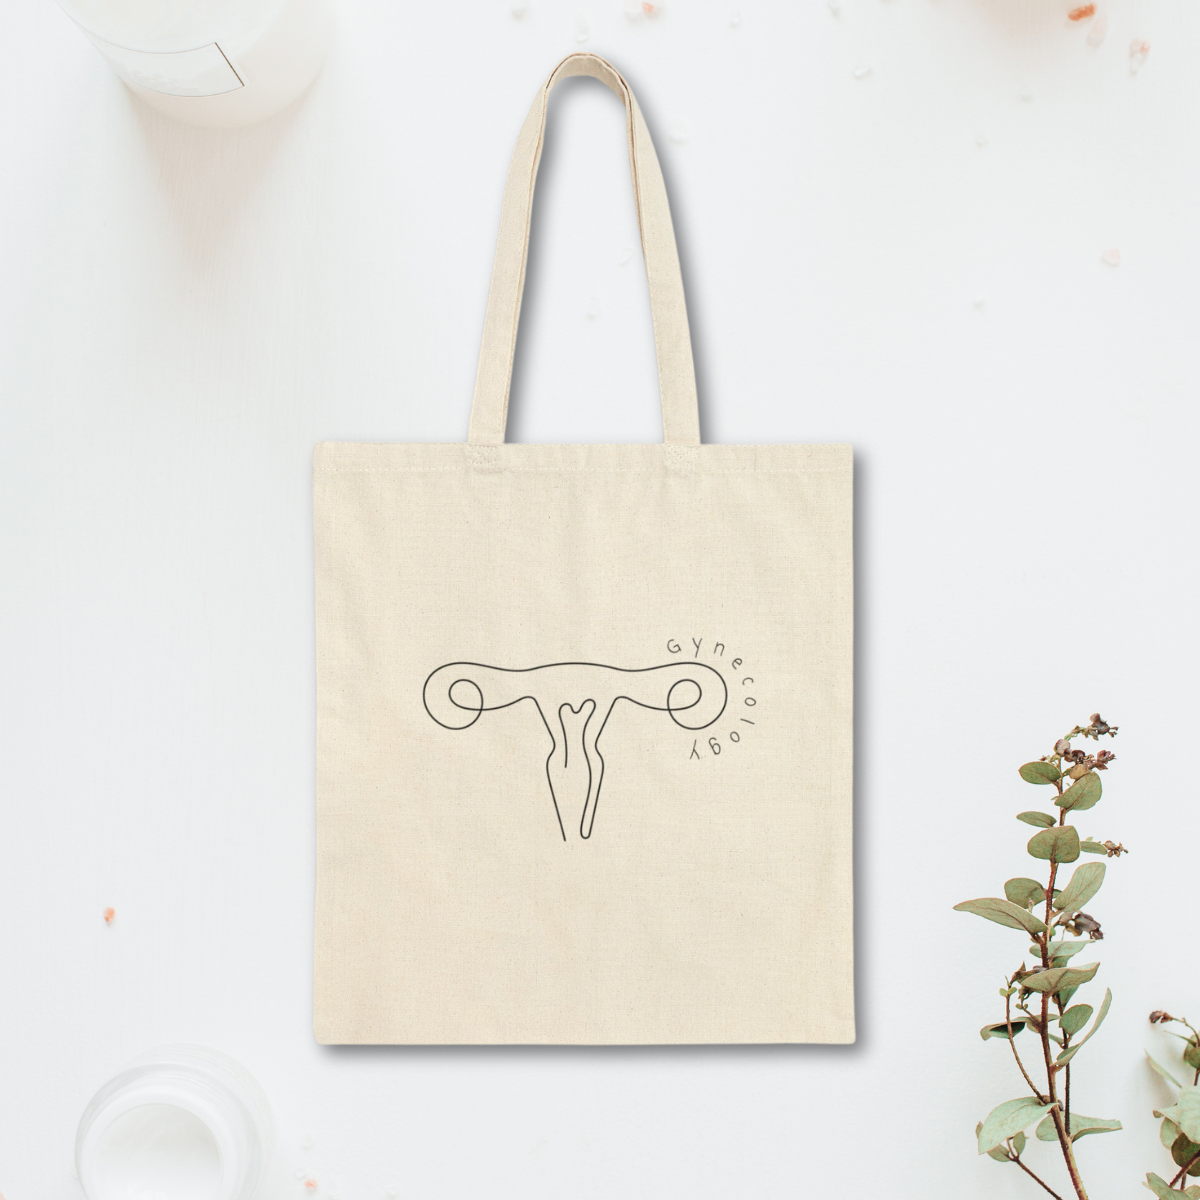 Gynecology Nurse work Tote Bag Minimalist Cute Graduation gift for Gynecologists and Gyn RNs Uterus Anatomical Womens health GynOnc Resident line art